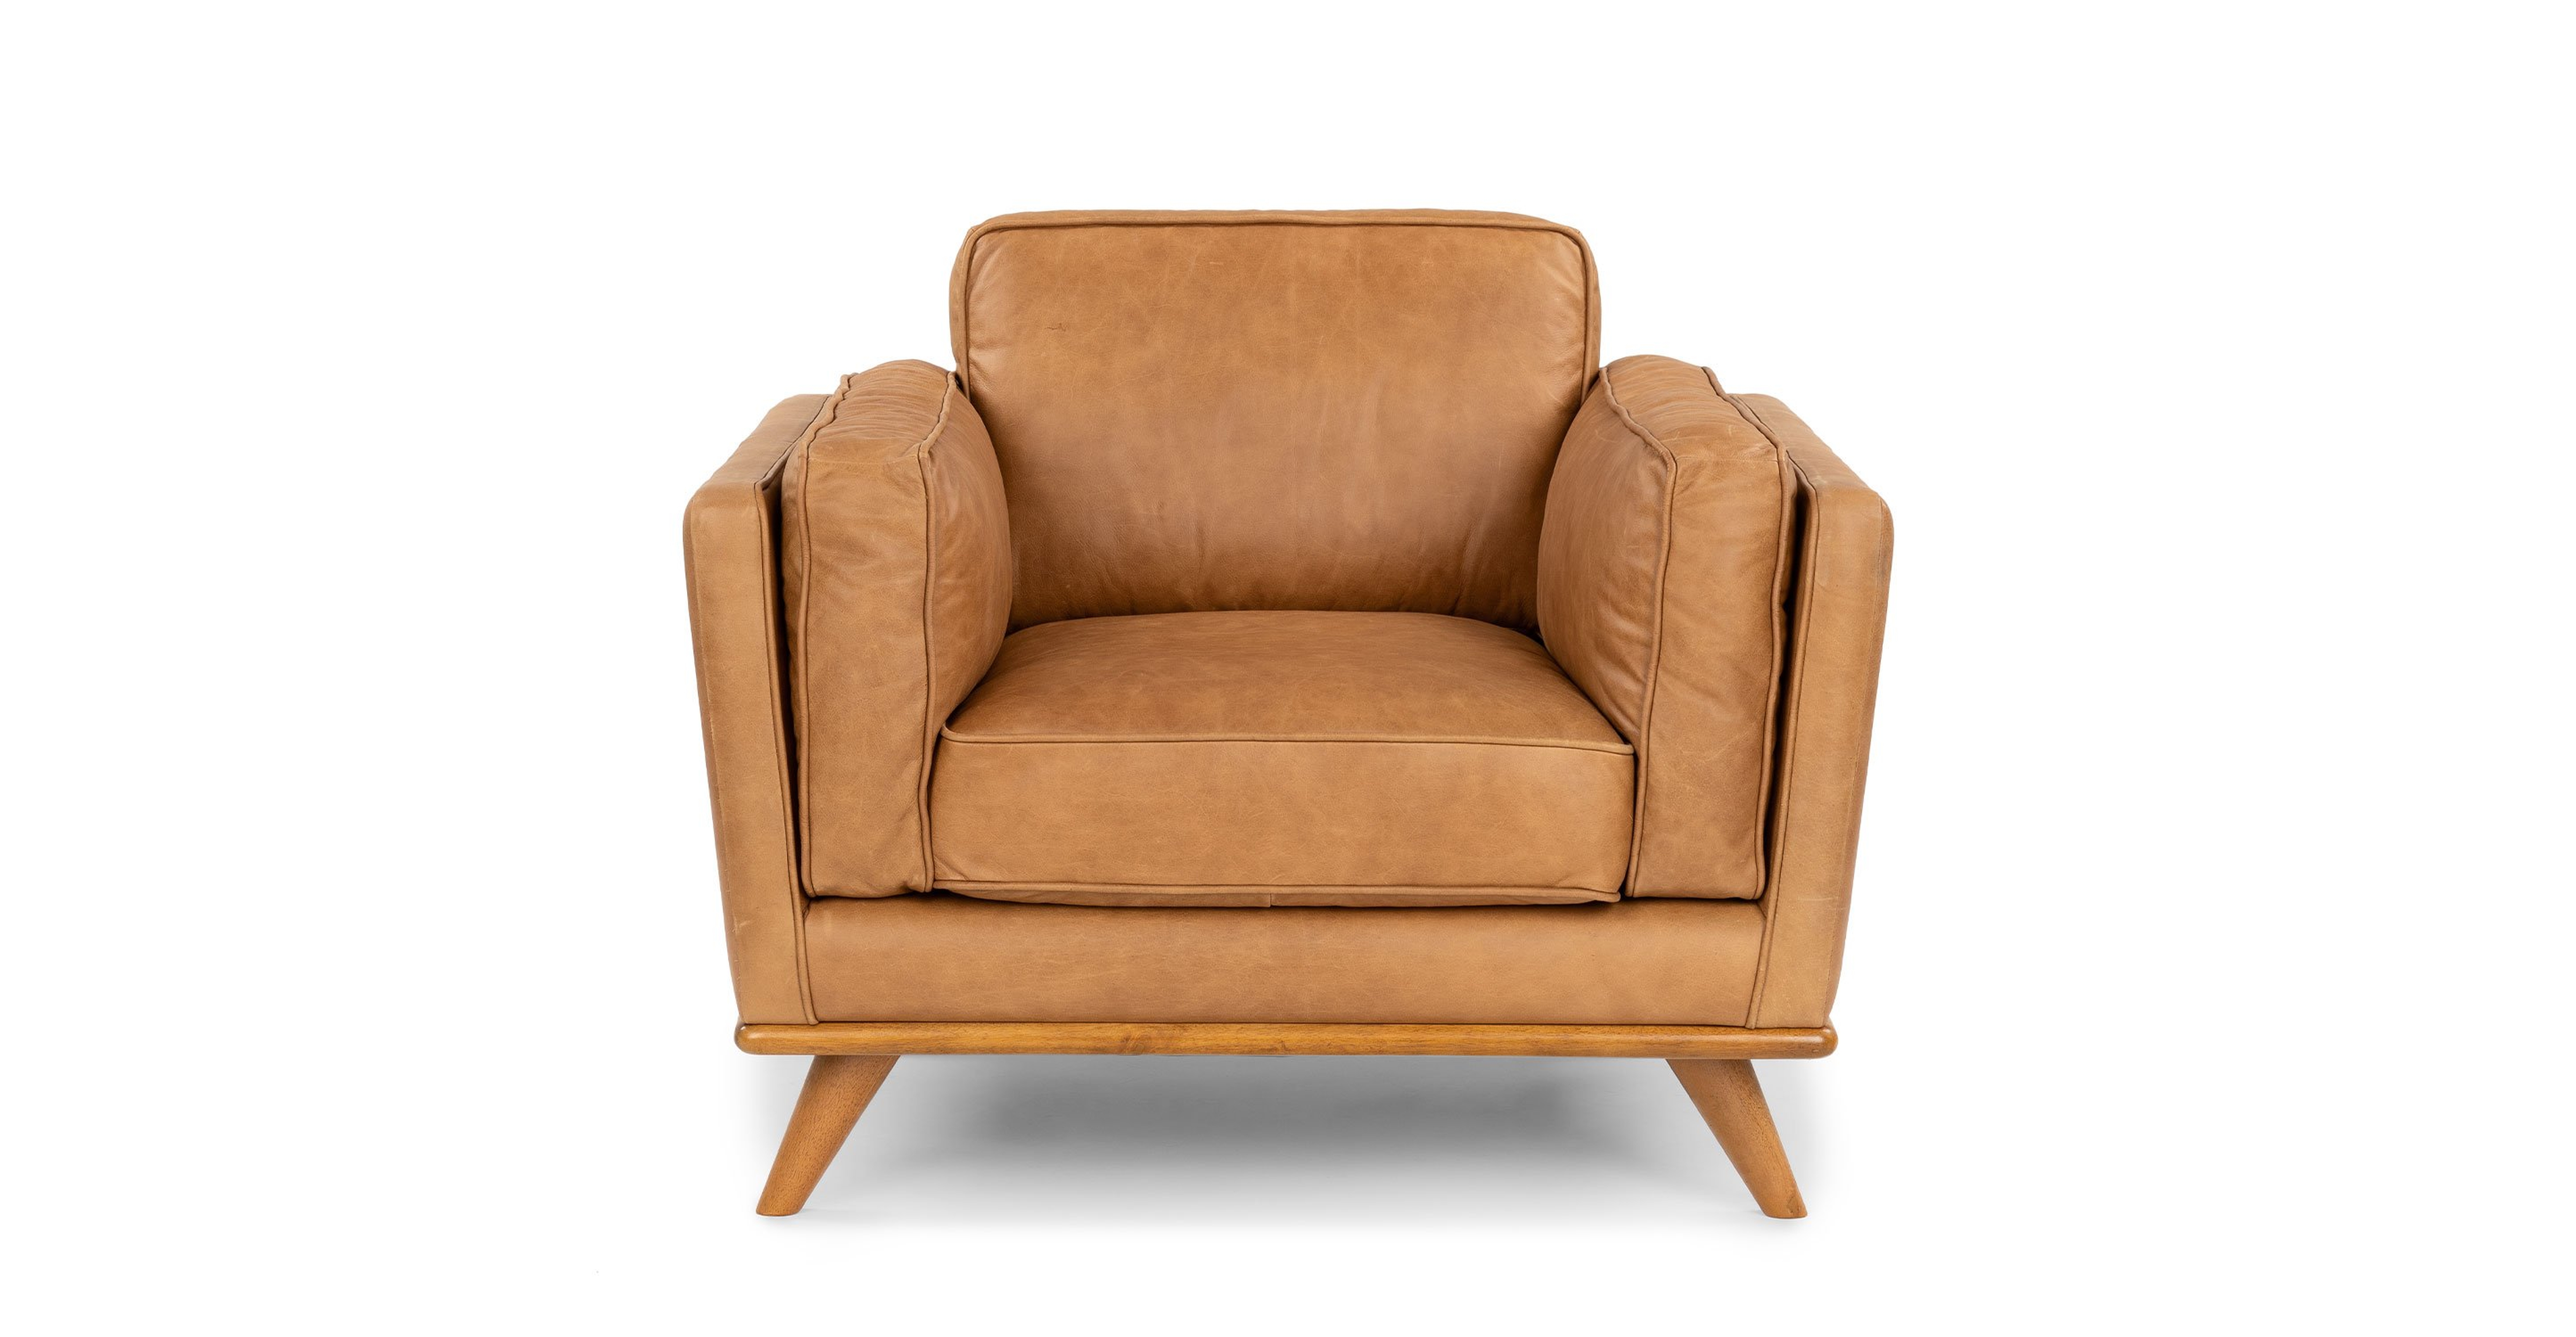 timber charme tan chair - Article